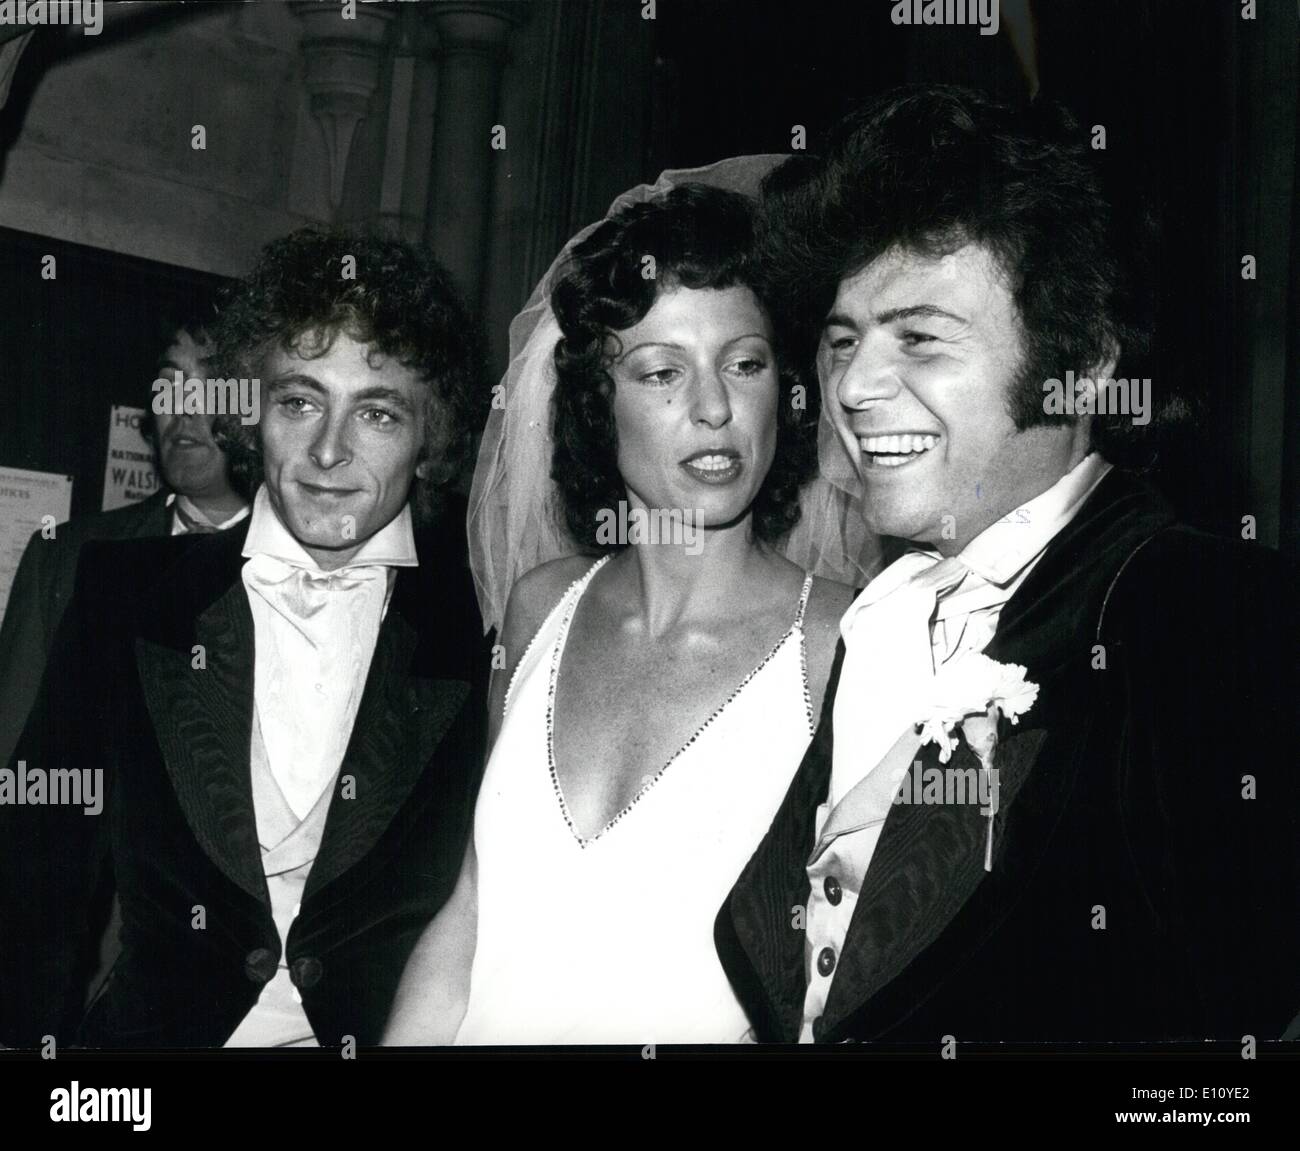 Sep. 09, 1974 - Pop Star Gary Glitter Is The Best Man At His Manager's Wedding In London: One of Britain's leading managers, record producers and songwriters, Mike Leander, was married today to top fashion model Penelope Carter, at St James' Church, Spanish Place, London. Pop Superstar, Gary Glitter, one of the pop stars managed by Leander Was the best man. Gary Glitter has a serious throat condition, and shortly goes into hospital for an operation. But he has been warned that he may never sing again after the operation Stock Photo